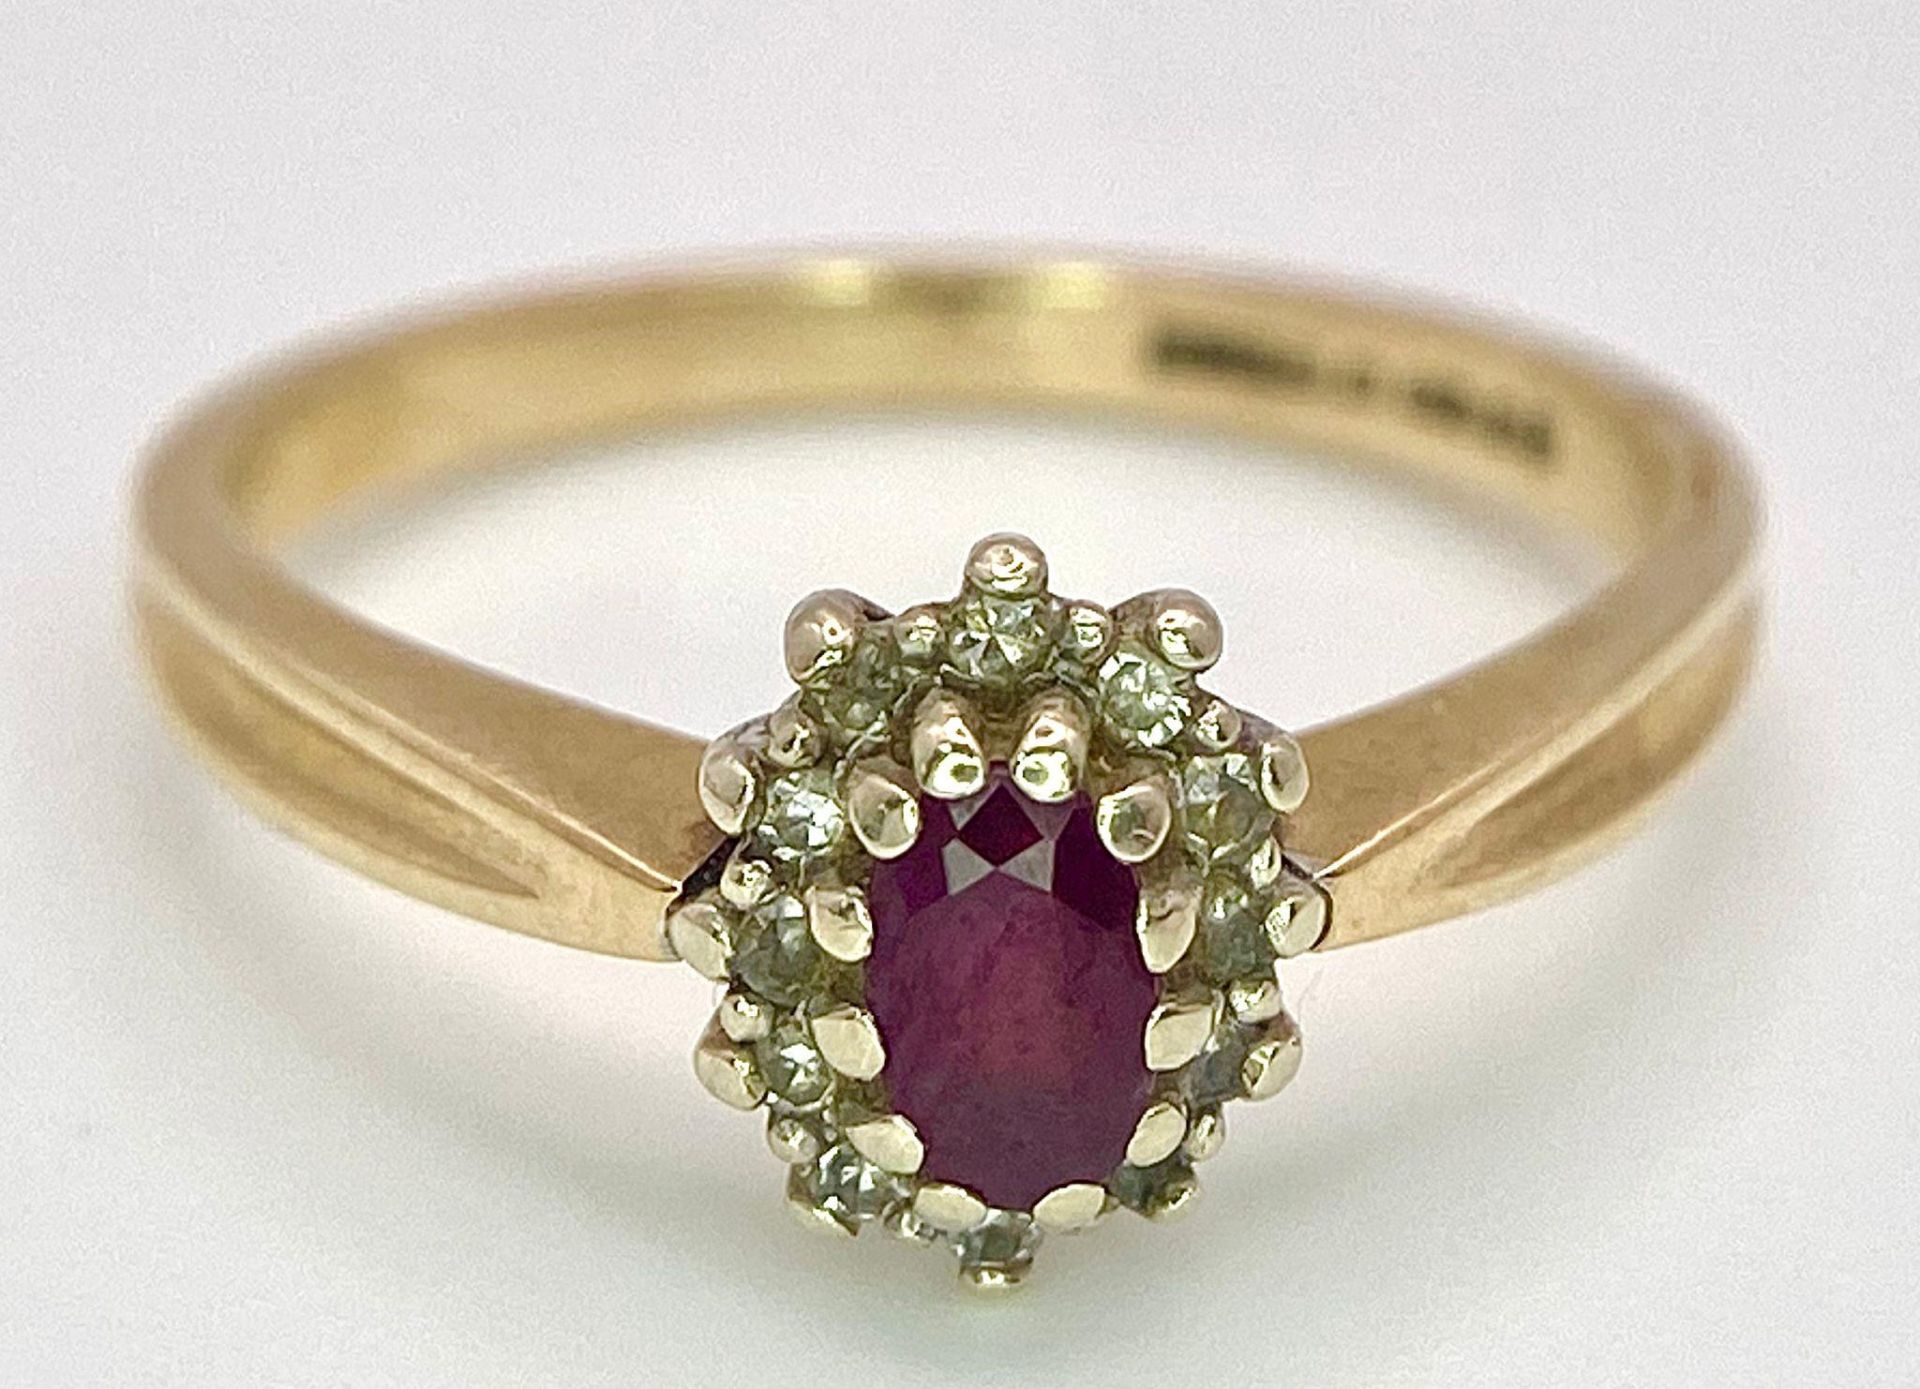 A Vintage 9K Yellow Gold Diamond and Ruby Ring. Central oval diamond with diamond surround. Size